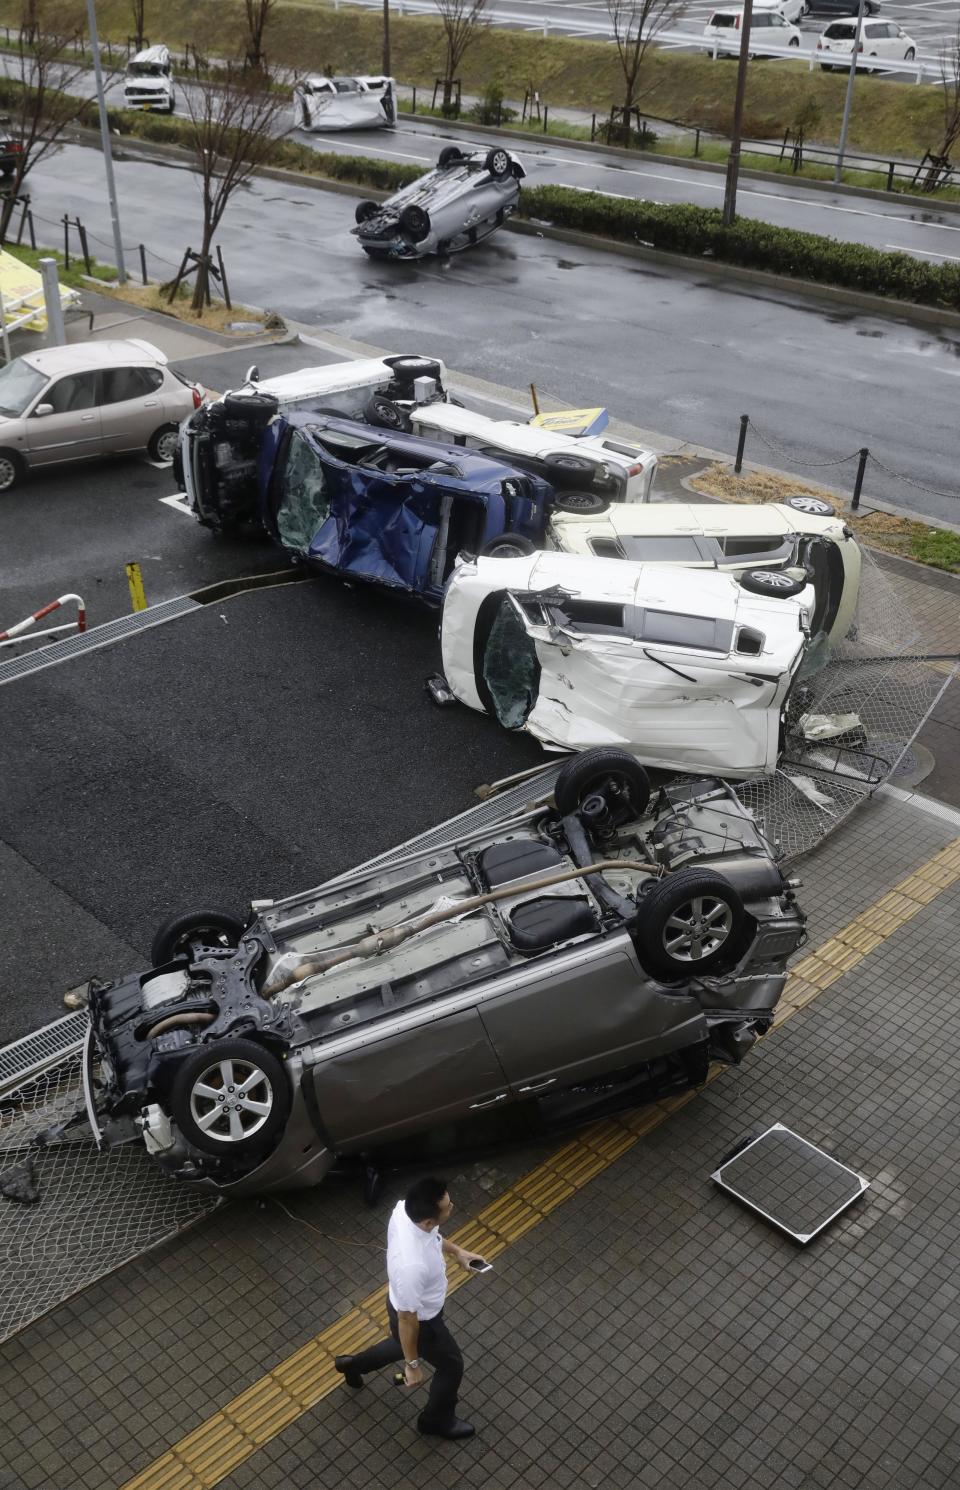 Overturned cars are seen on street following a powerful typhoon in Osaka, western Japan, Tuesday, Sept. 4, 2018. A powerful typhoon blew through western Japan on Tuesday, causing heavy rain to flood the region's main offshore international airport and high winds to blow a tanker into a connecting bridge, disrupting land and air travel. (Kota Endo/Kyodo News via AP)